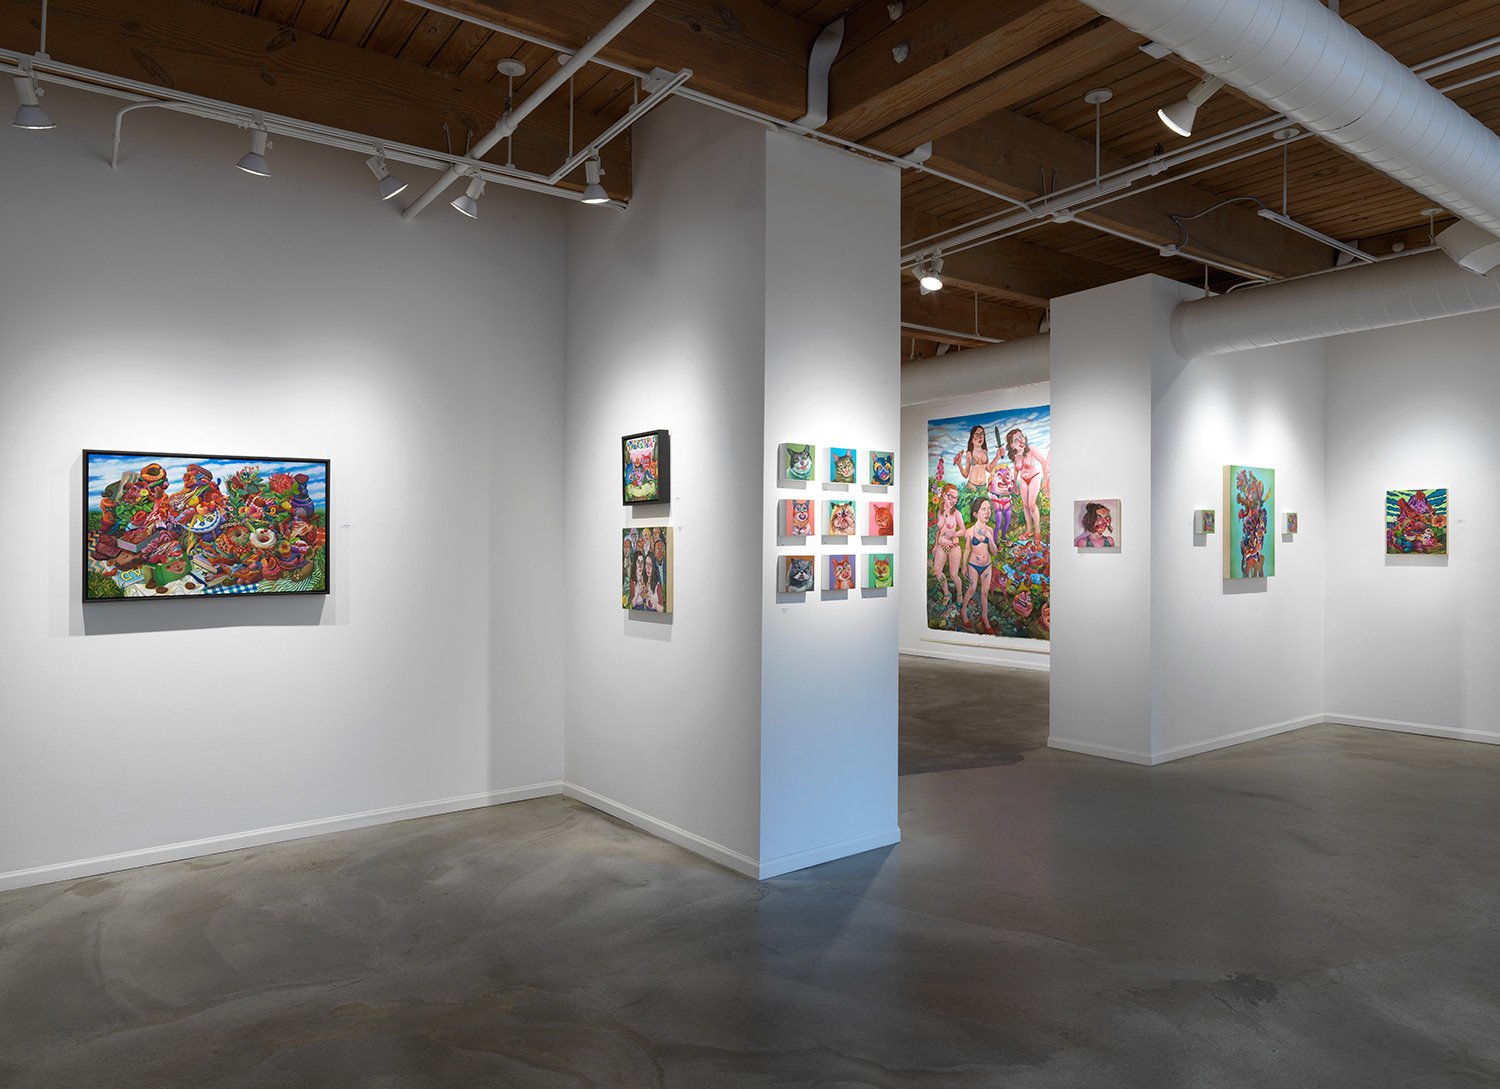 Installation view of Emphatic Supreme at Zg Gallery